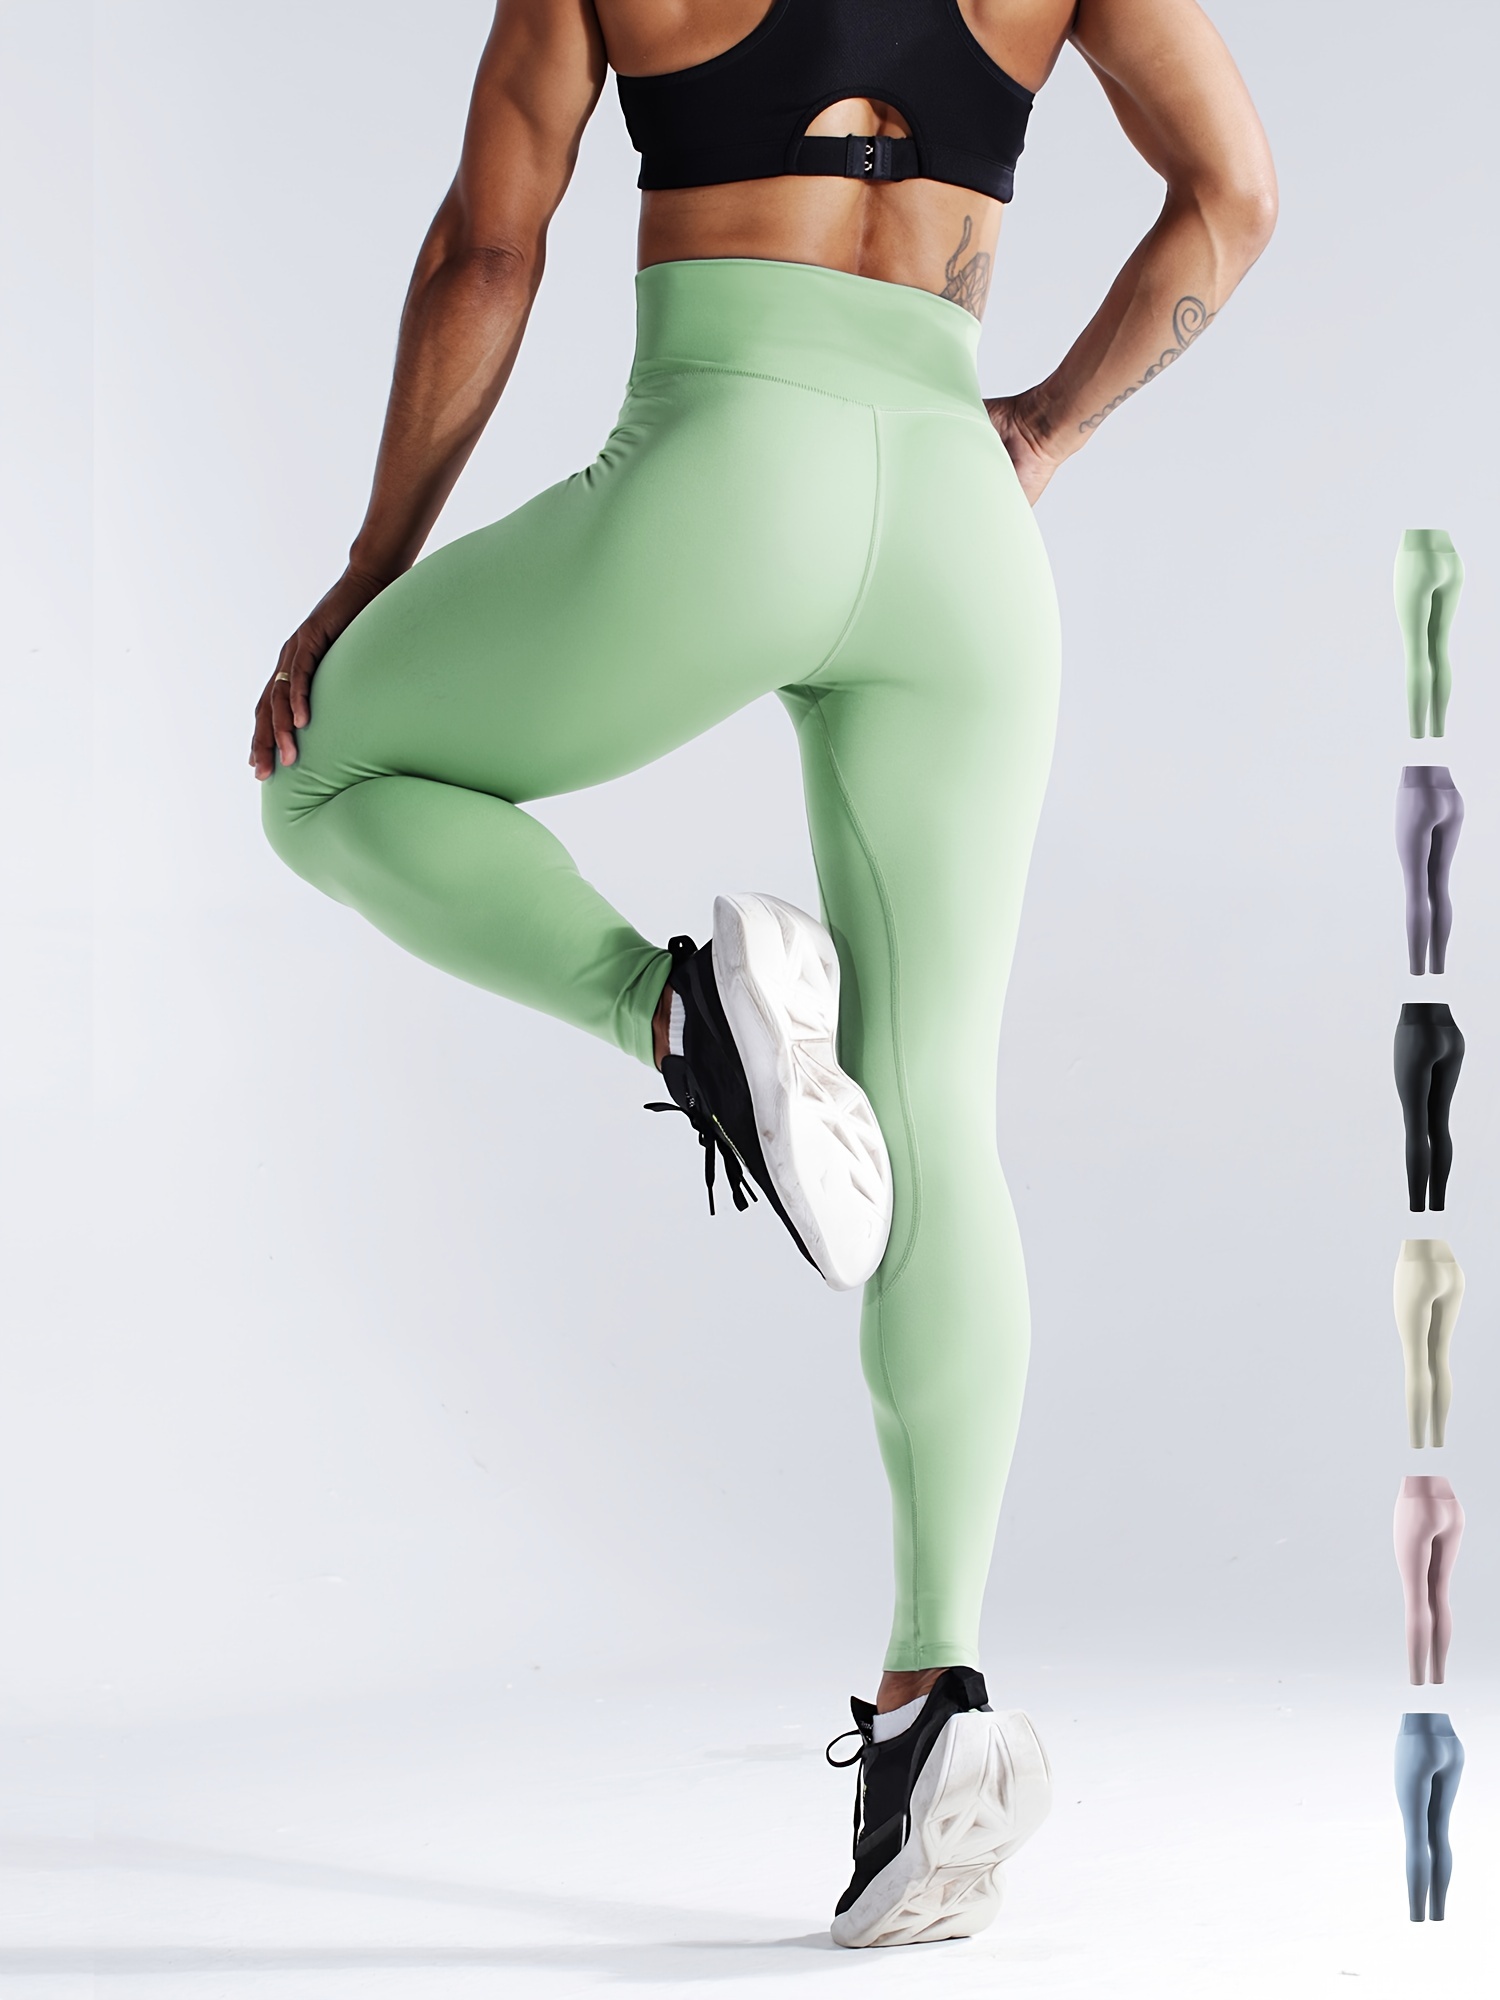 Stretch Garments Light Green Adults Athletic Fit Leggings With Pockets  [FINAL SALE] wonderful gift - Svaha Apparel Sales Store